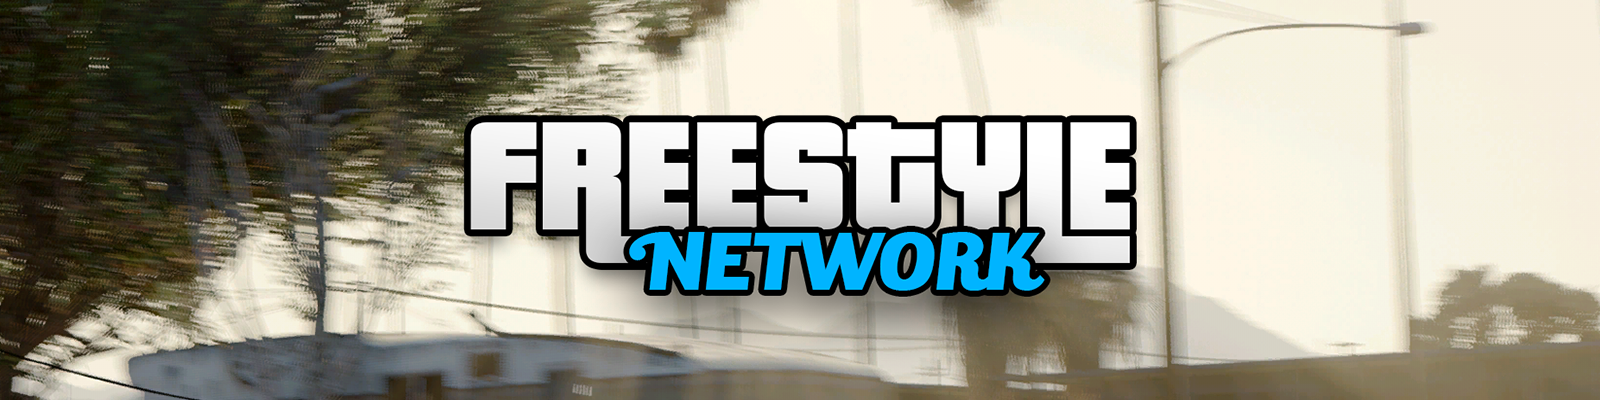 Freestyle Network Serious Roleplay Els Active Police Exclusive Addon Vehicles Discord Gg Ev2vjnd Server Bazaar Cfx Re Community